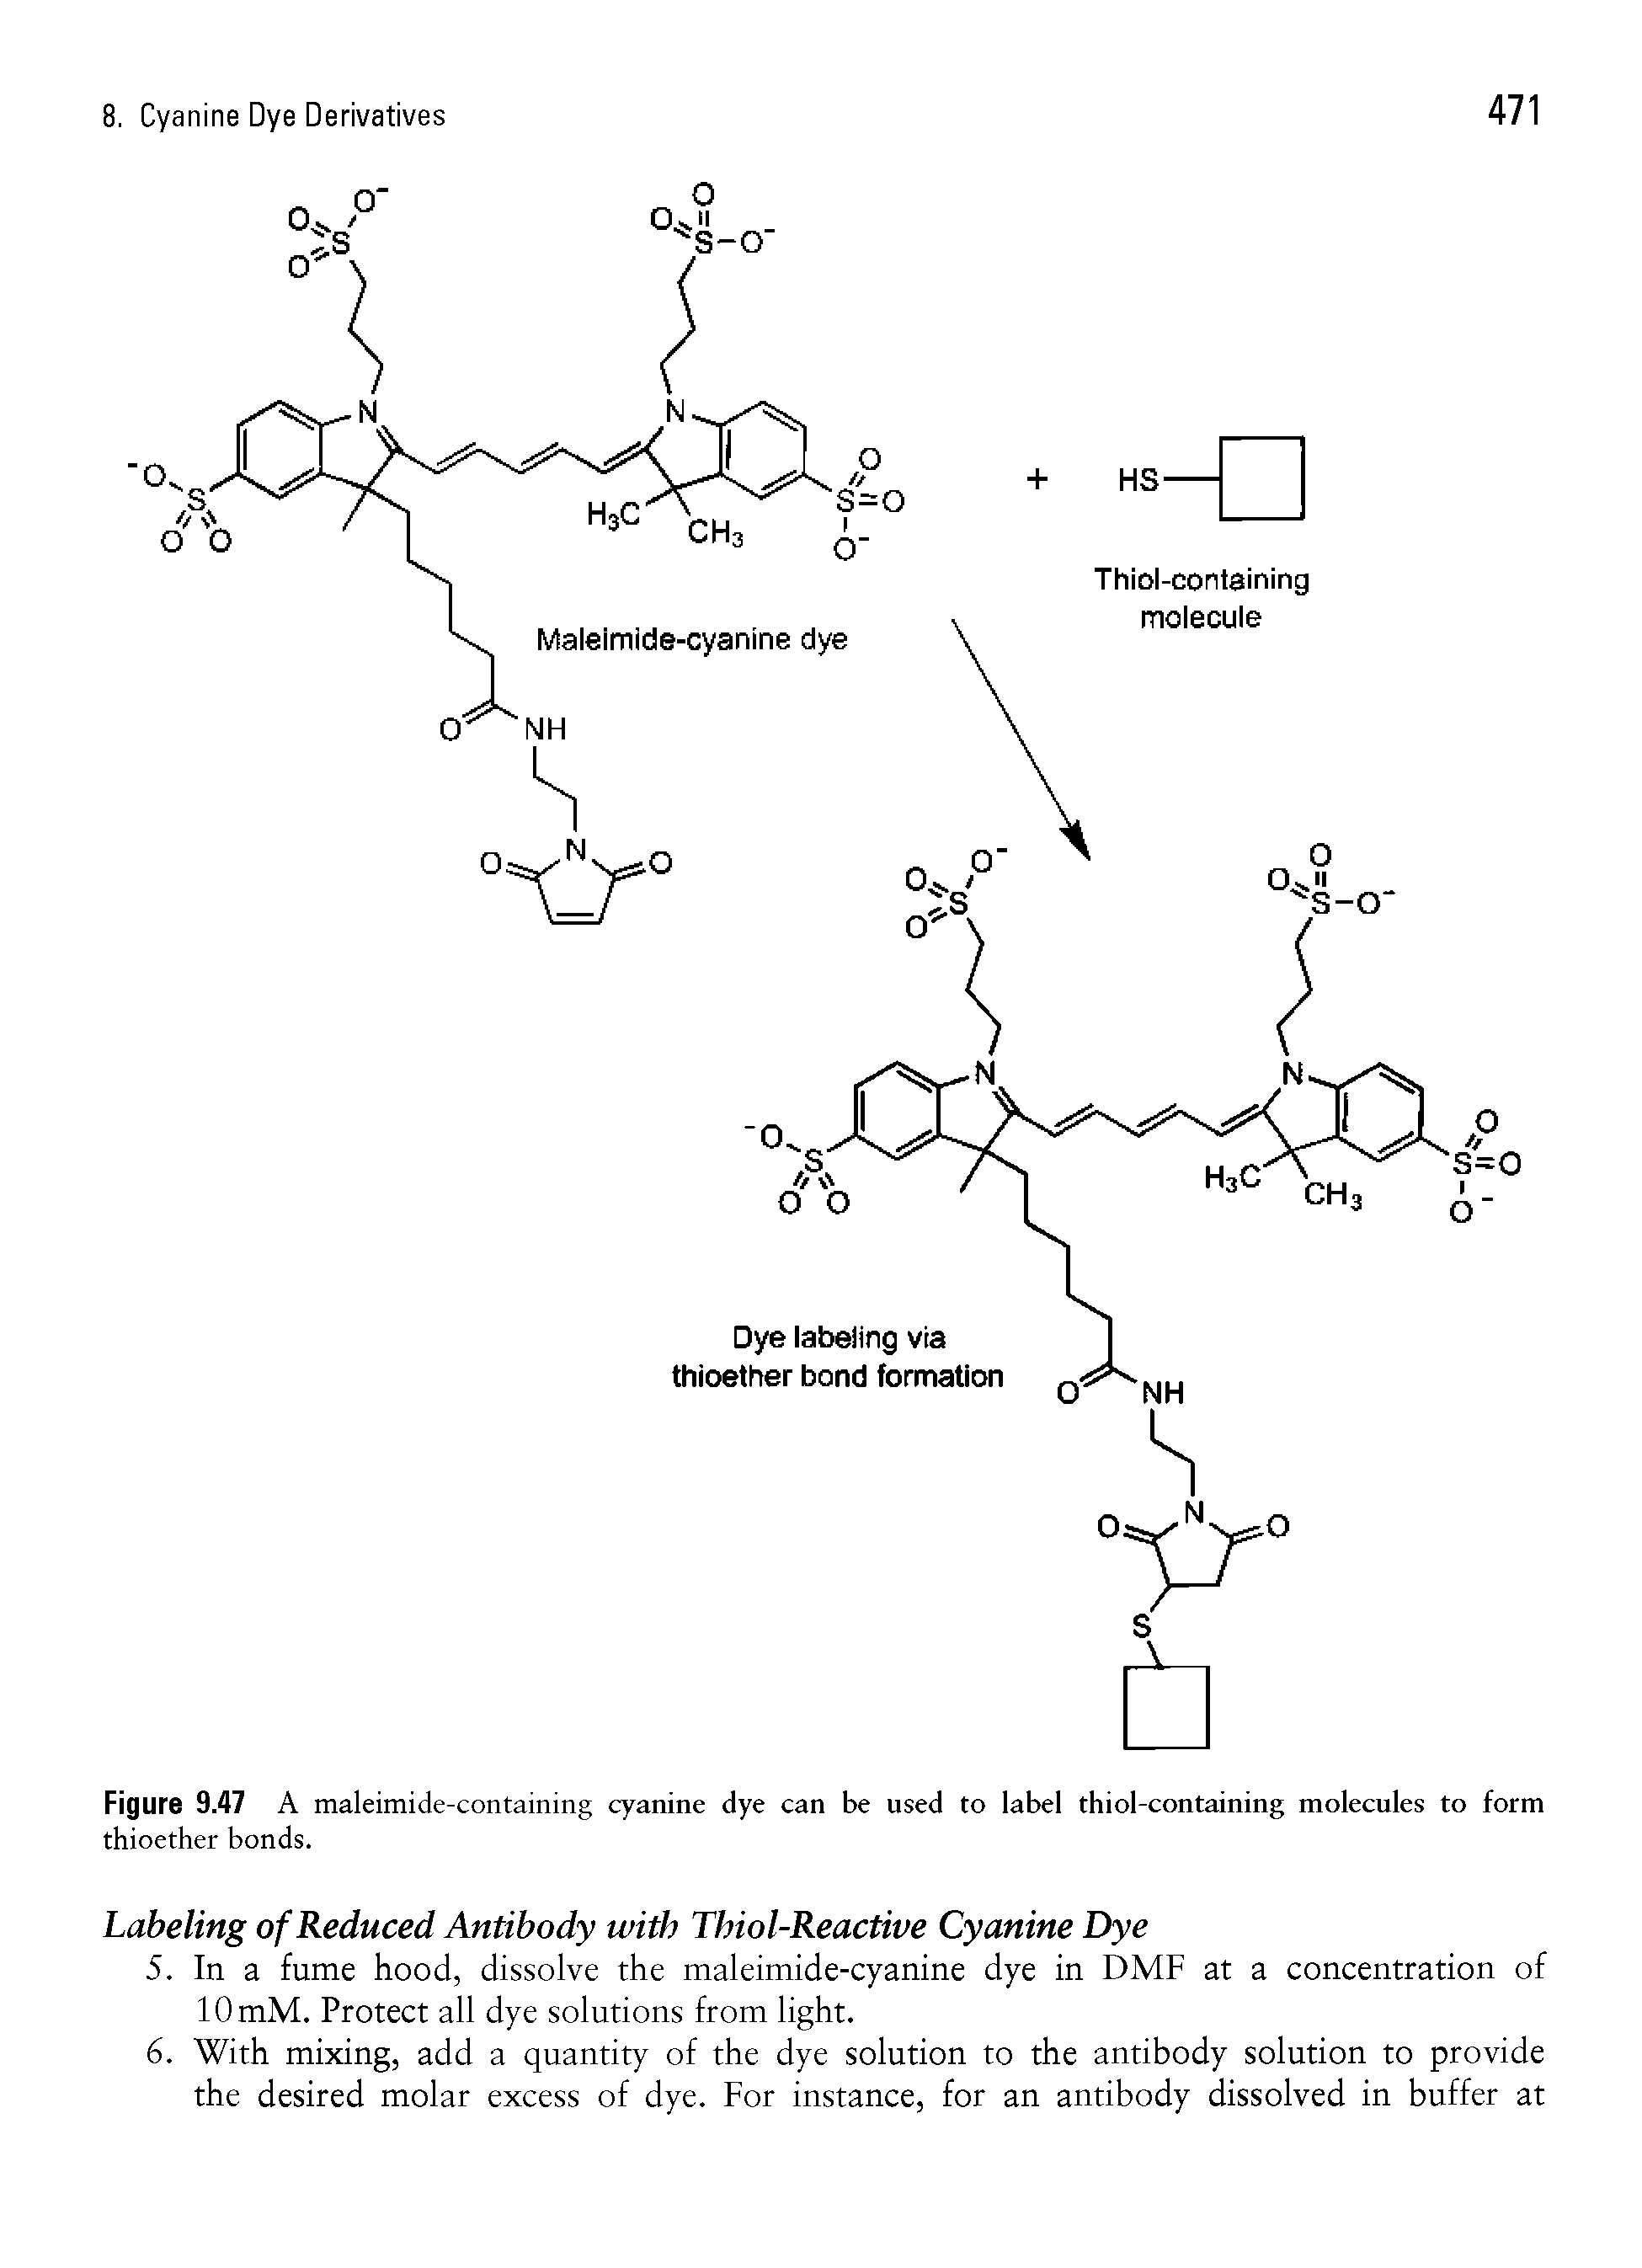 Figure 9.47 A maleimide-containing cyanine dye can be used to label thiol-containing molecules to form thioether bonds.